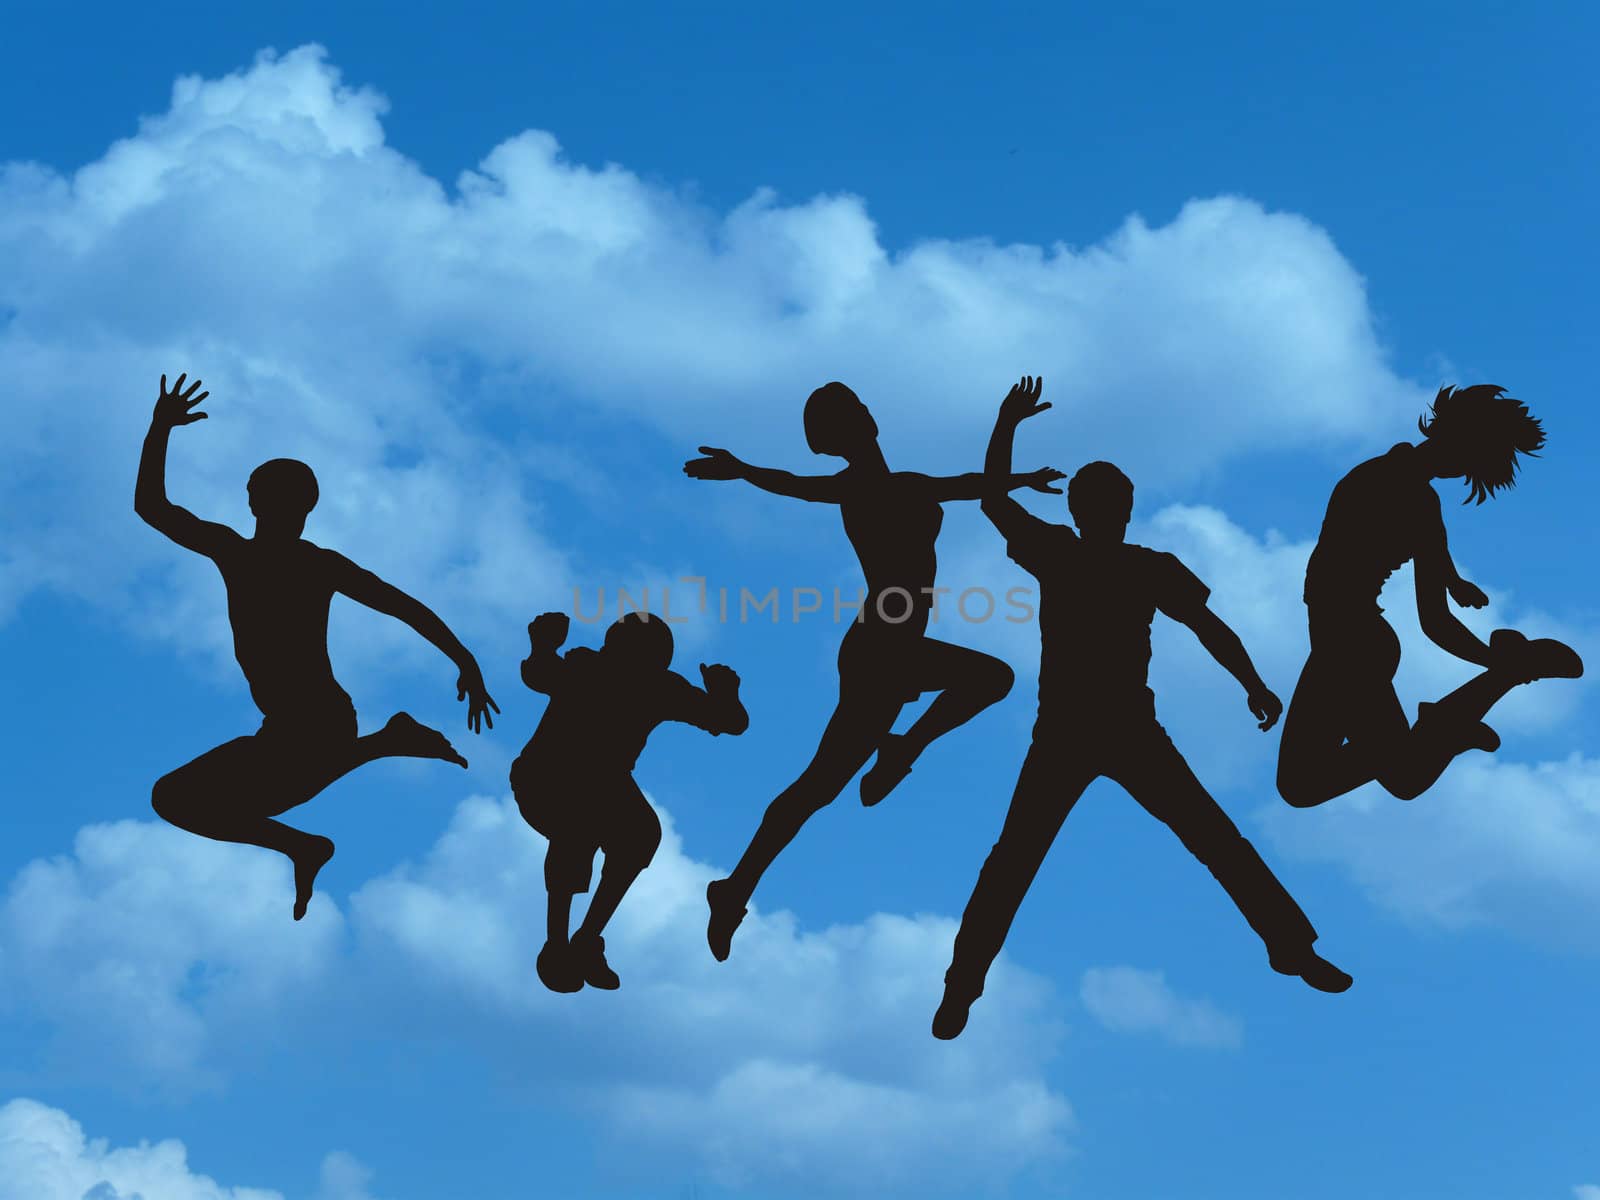 Silhouettes of young people jumping